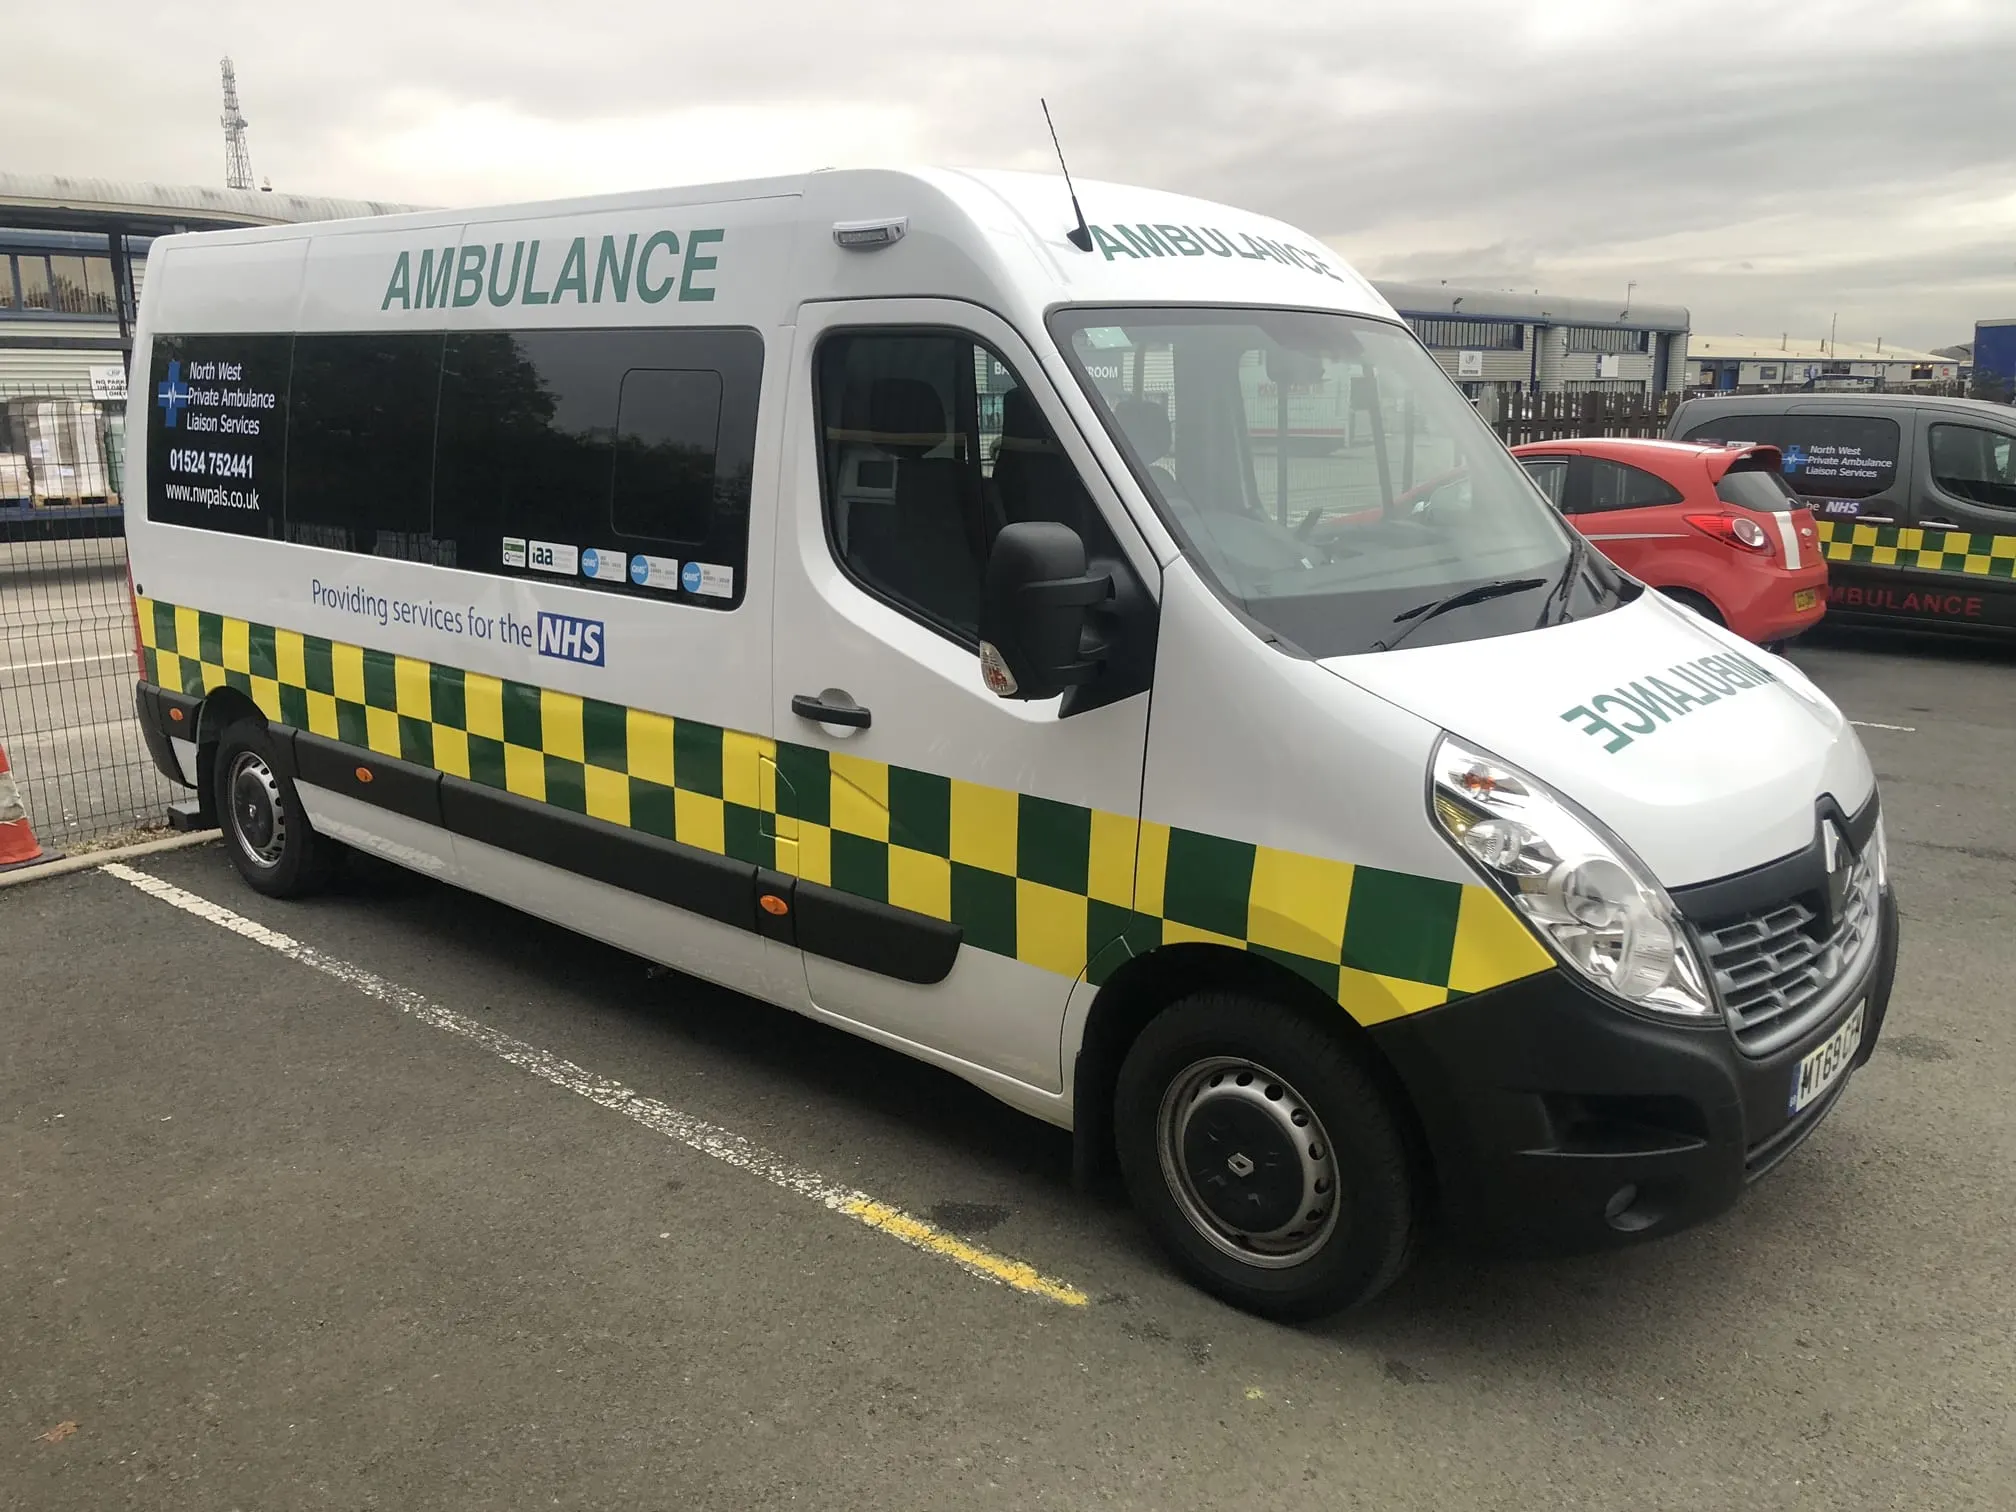 North West Private Ambulance Liaison Services Morecambe 01524 752441